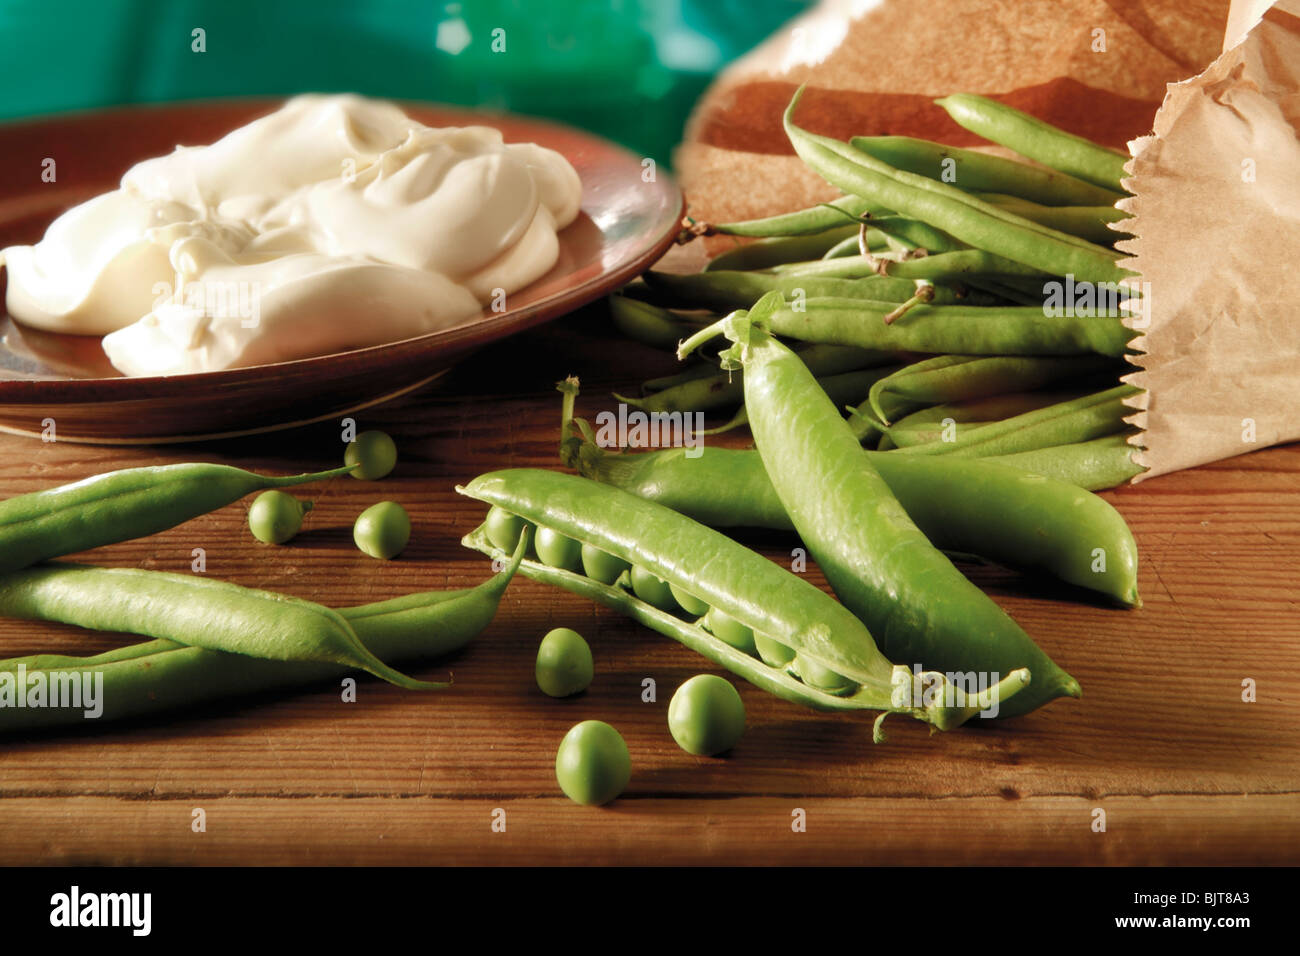 Food still life of fresh picked garden peas and pea in pods  on a rustic table in a kitchen being prepared Stock Photo